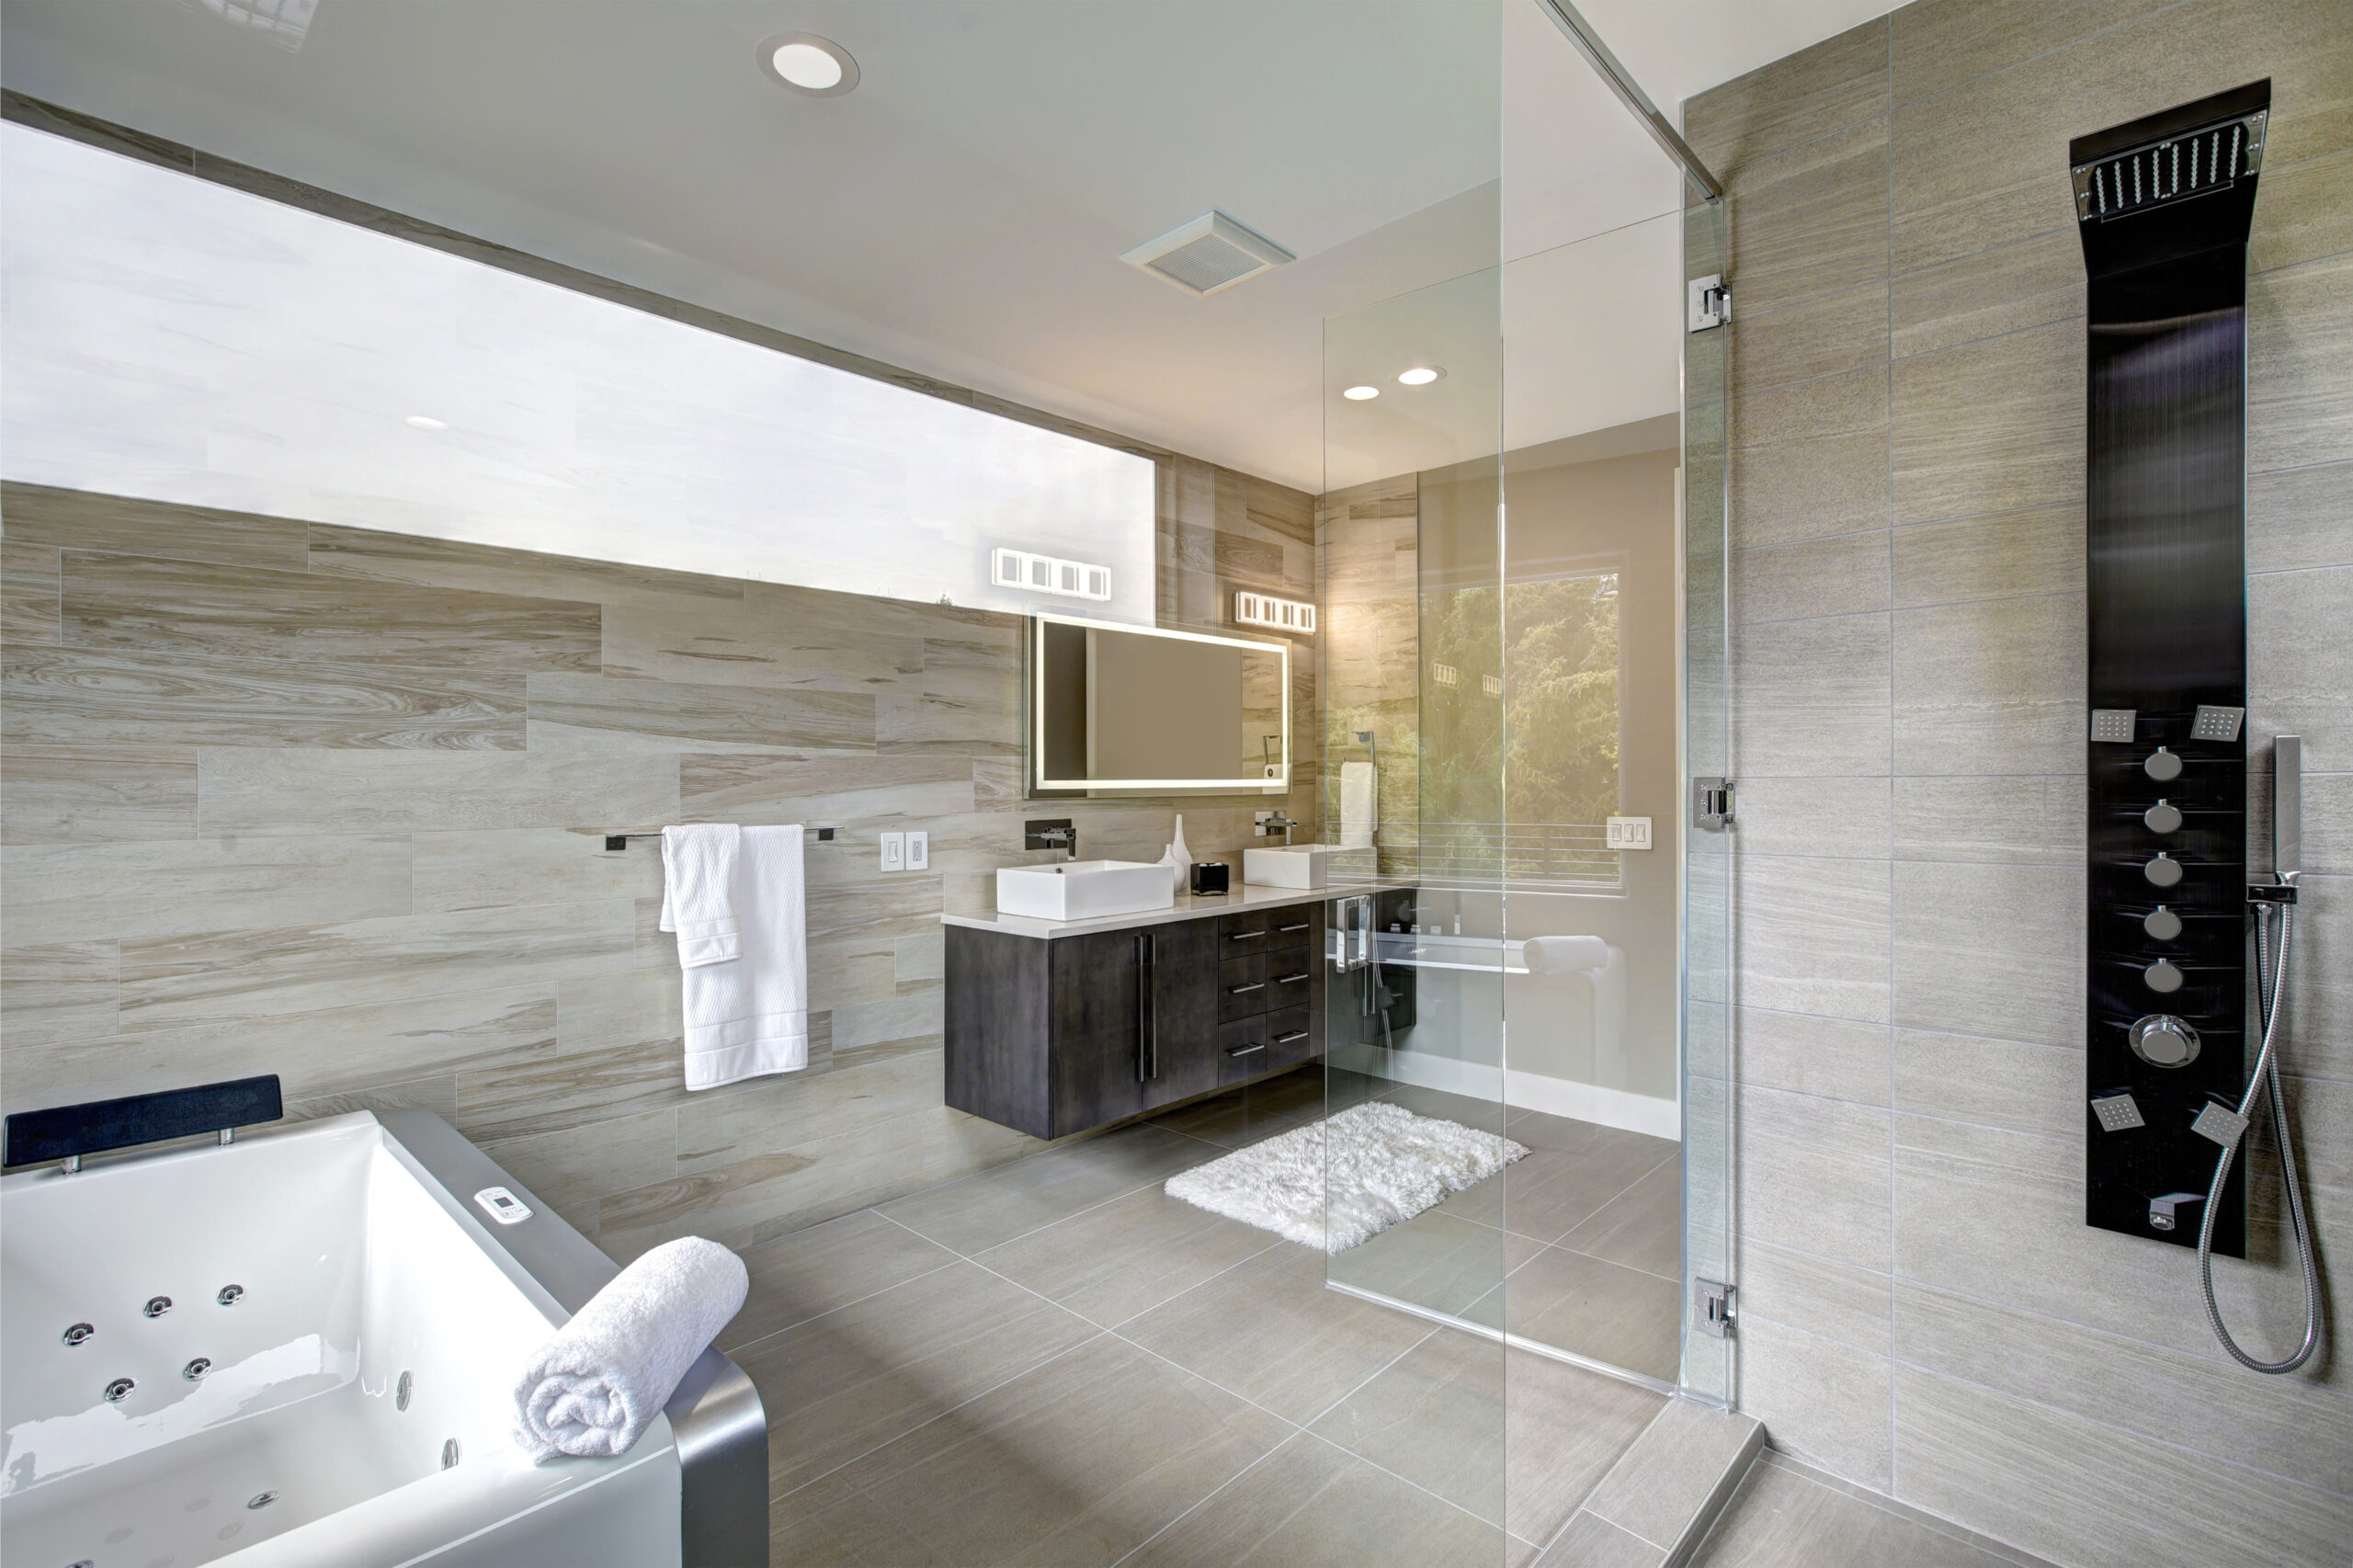 3 Additions You Can Add to Improve Your Bathroom